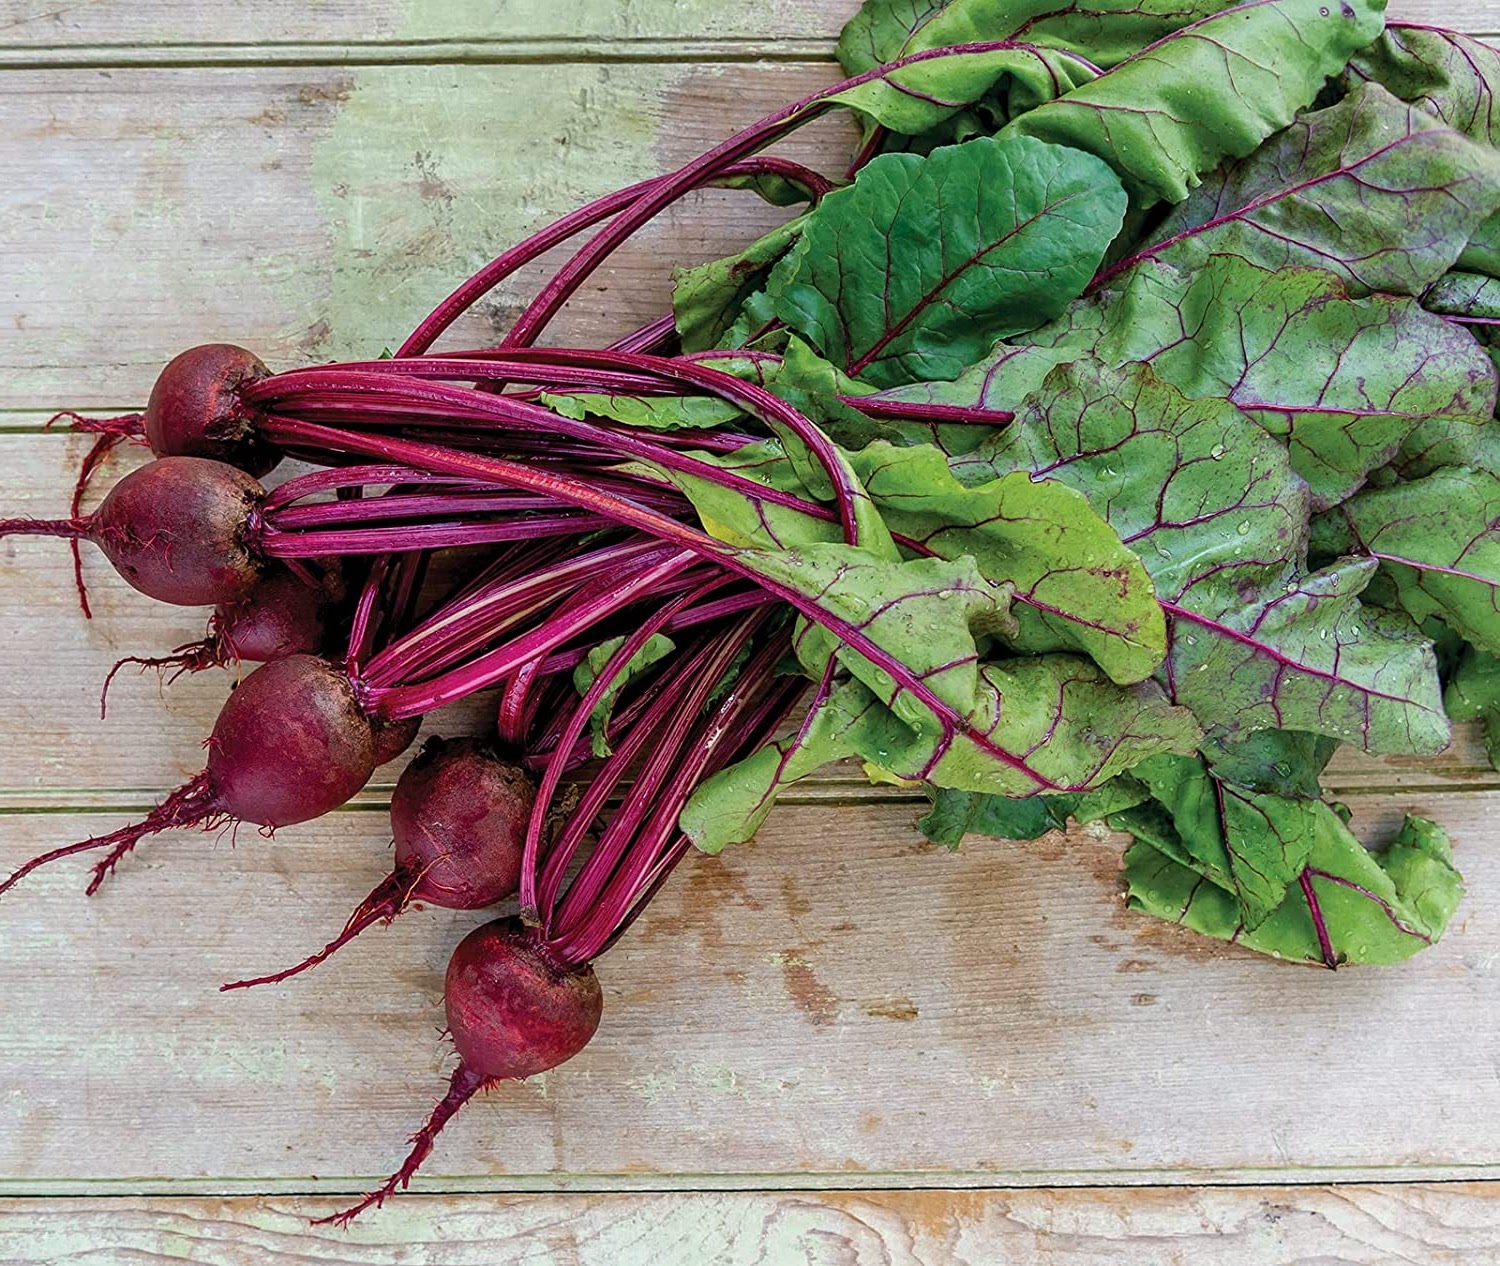 While beetroots are best known for their famous red color, their health benefits are not only limited to their color, but the leaves have a lot of health benefits, too.